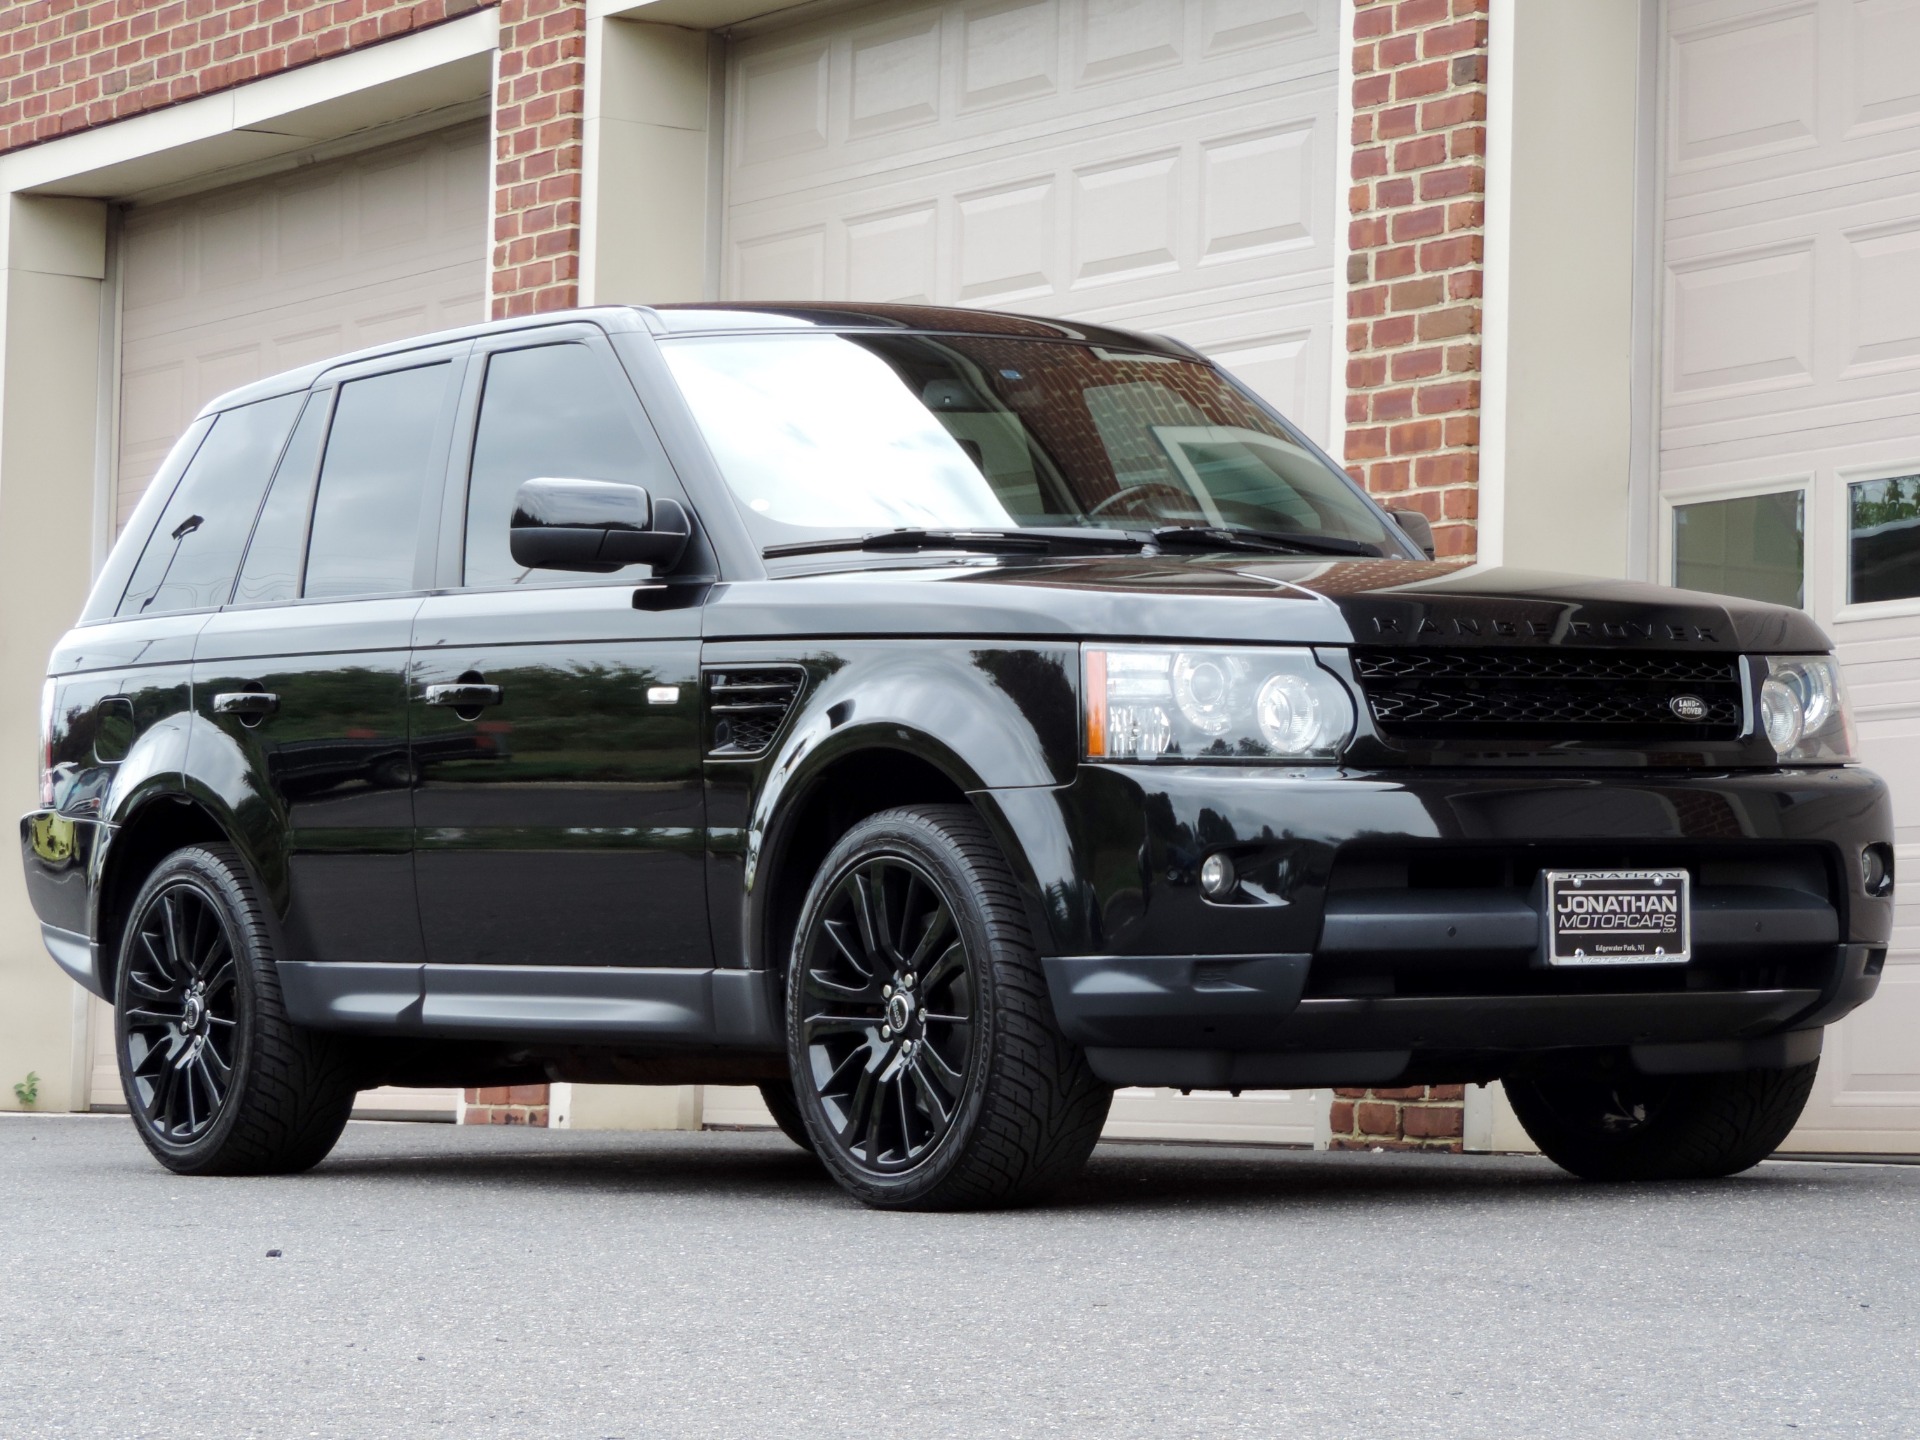 2013 Land Rover Range Rover Sport HSE LUX Stock # 761121 for sale near